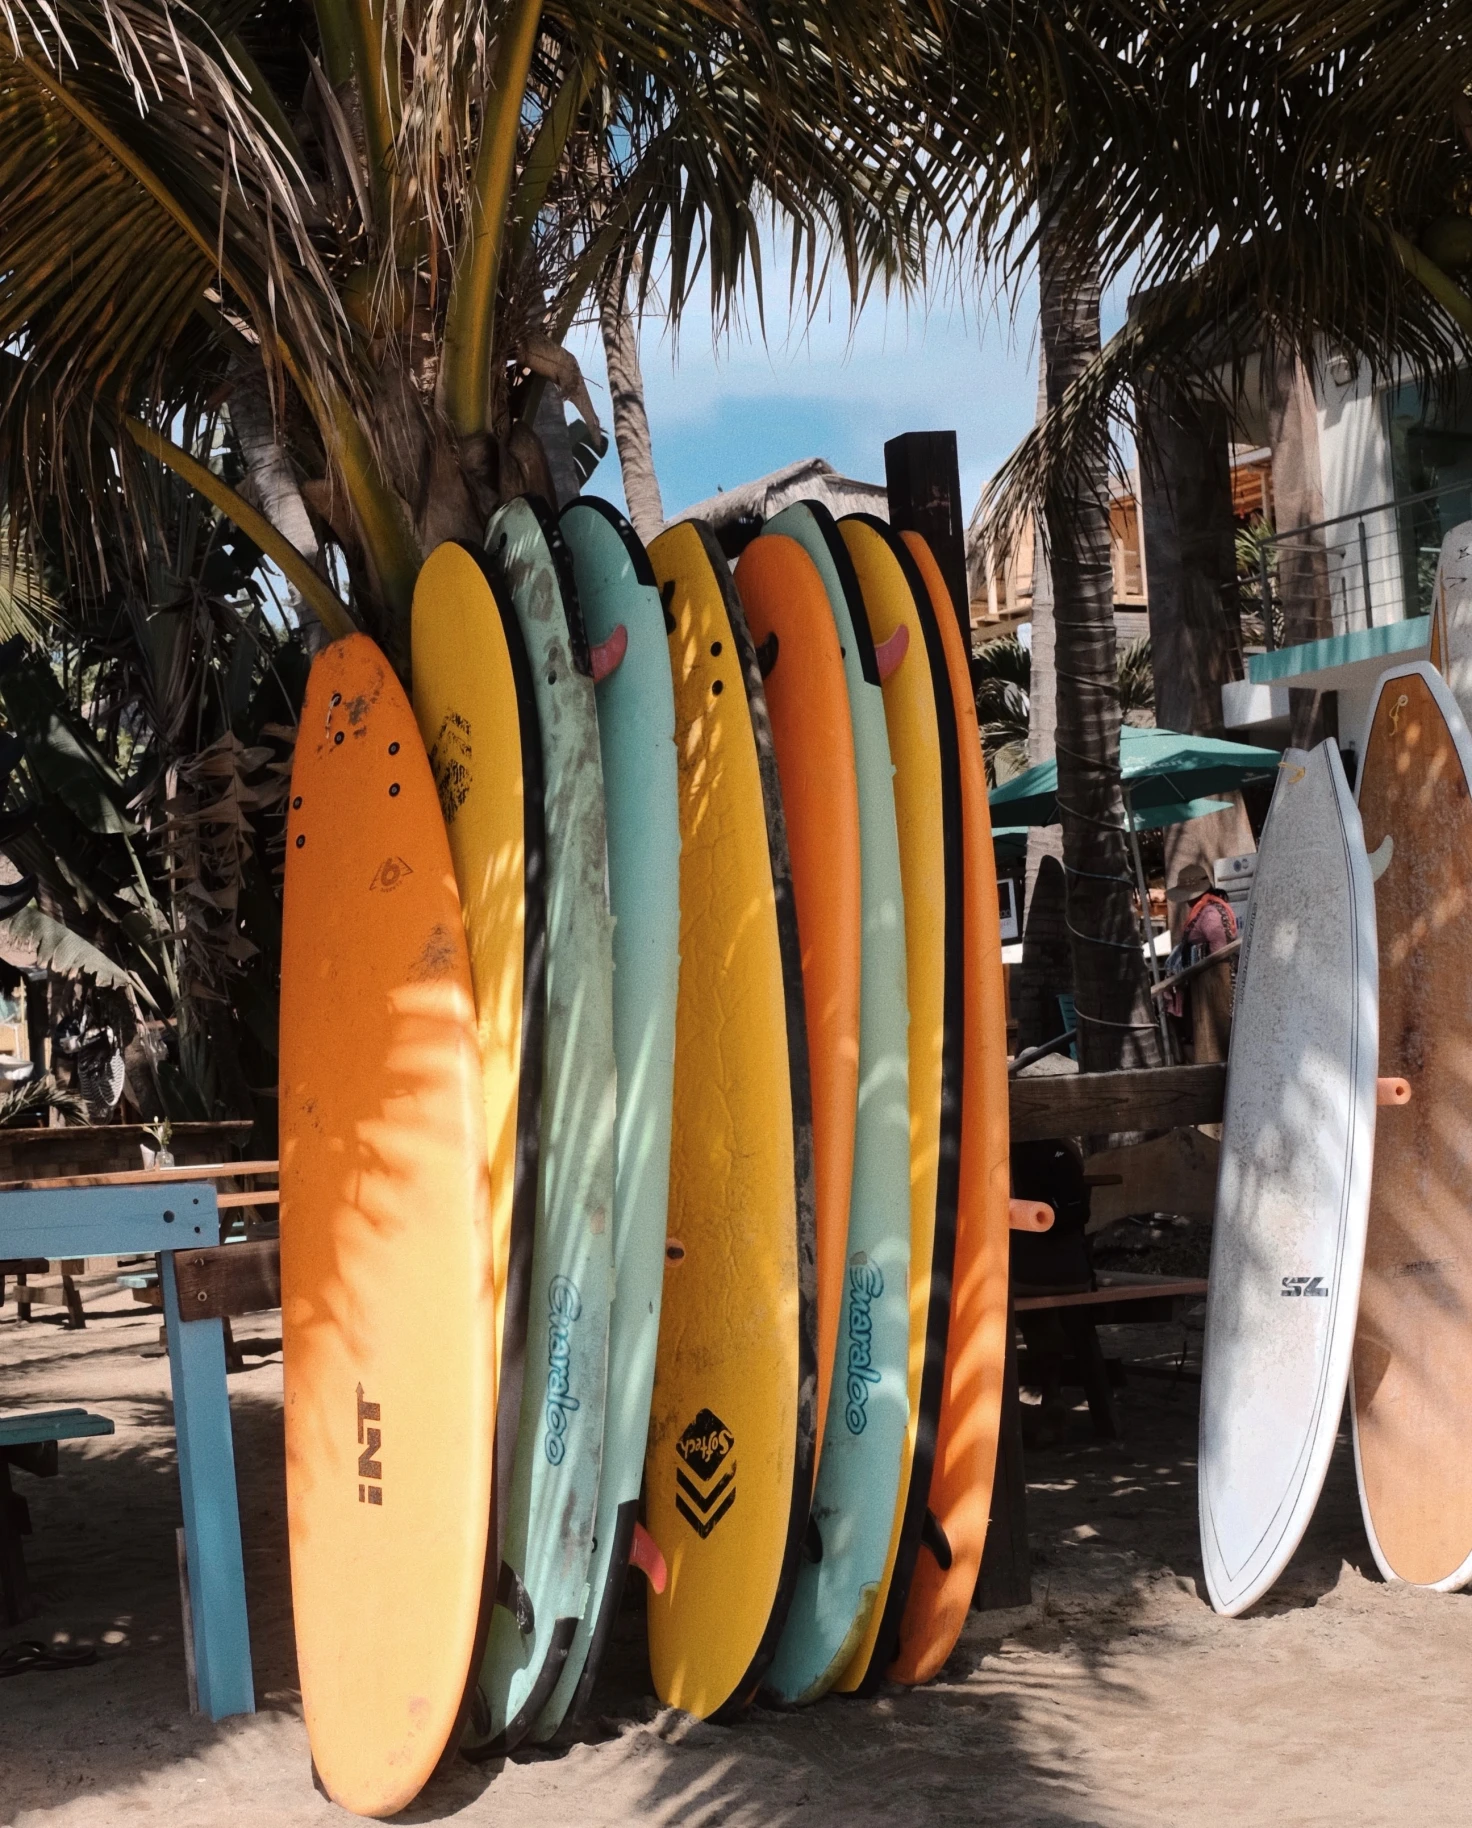 Colorful surfboards leaning against a palm tree in Sayulita. 